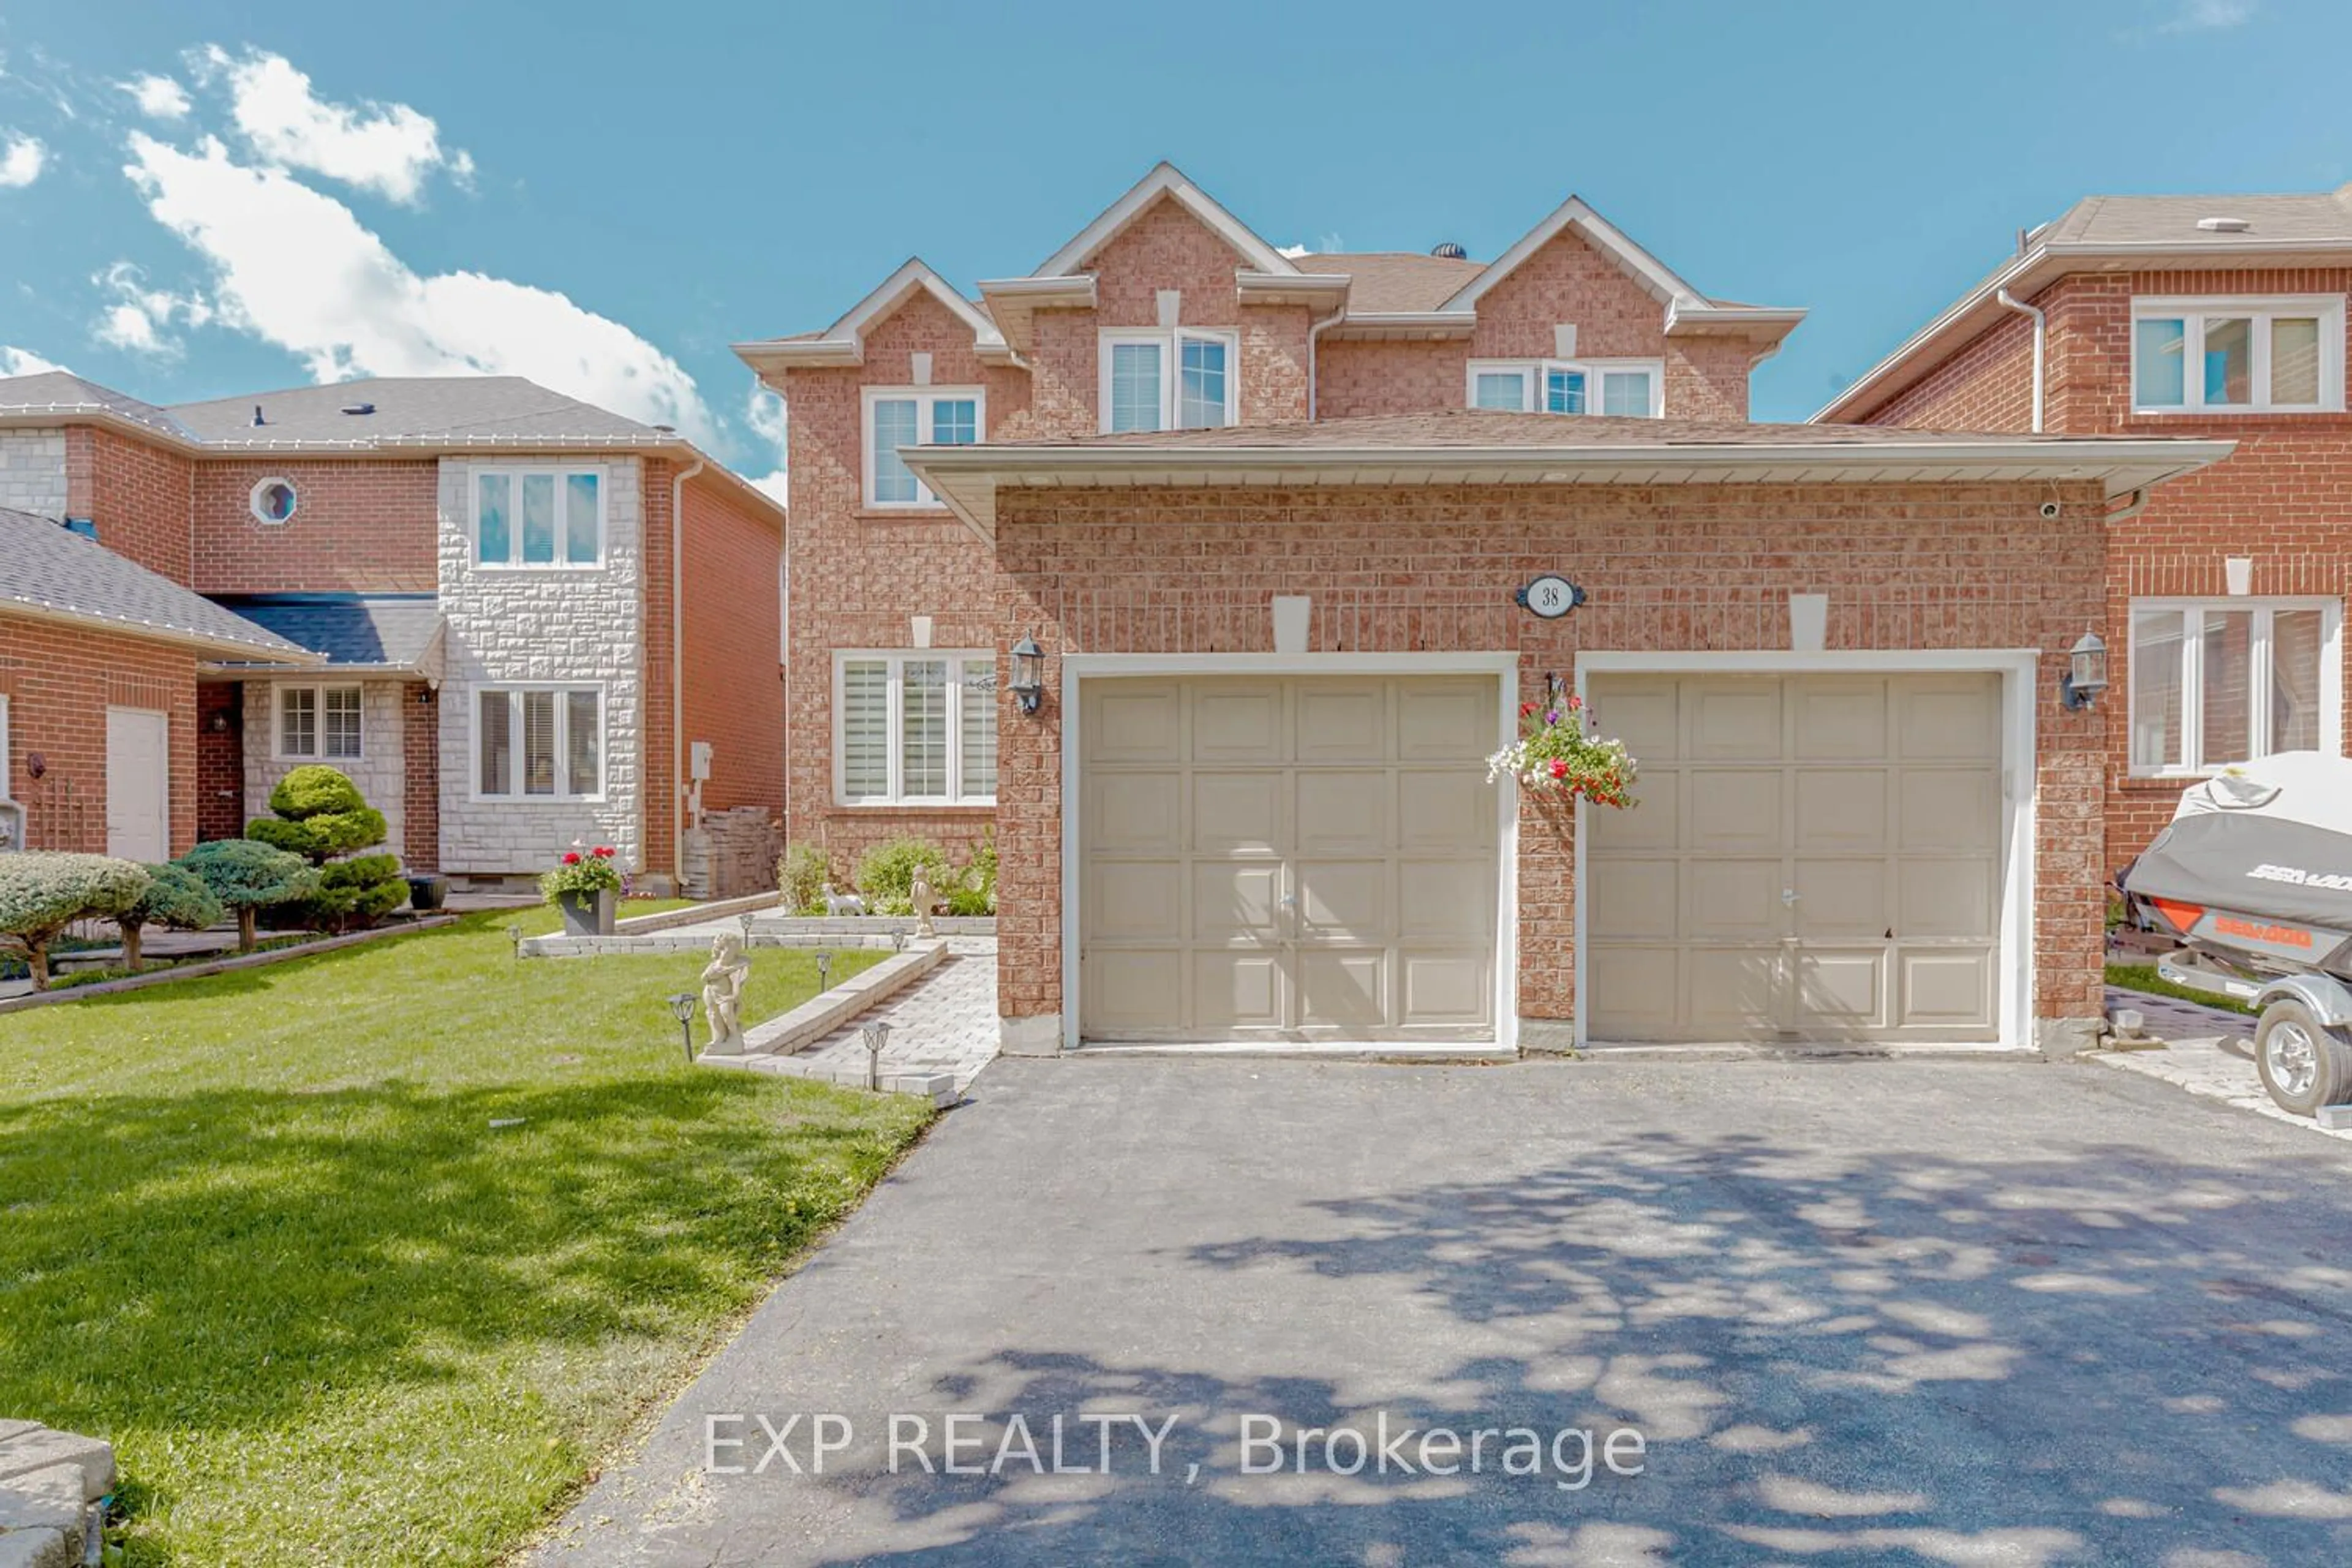 Frontside or backside of a home for 38 Lockwood Rd, Brampton Ontario L6Y 4T7